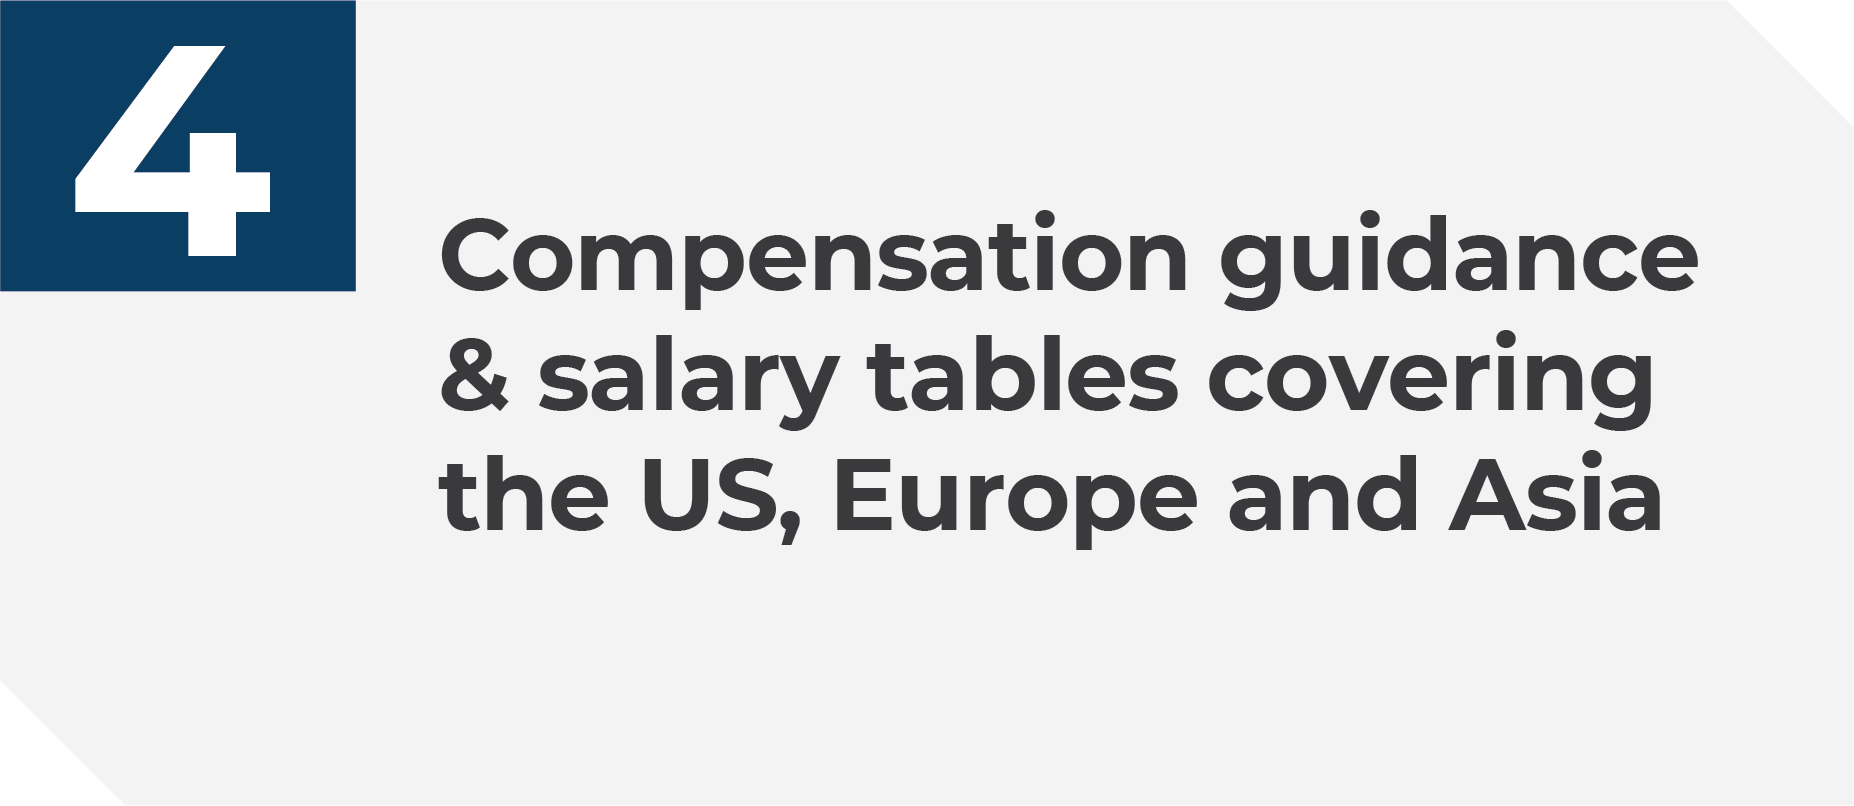 Compensation guidance & salary tables covering the US, Europe and Asia